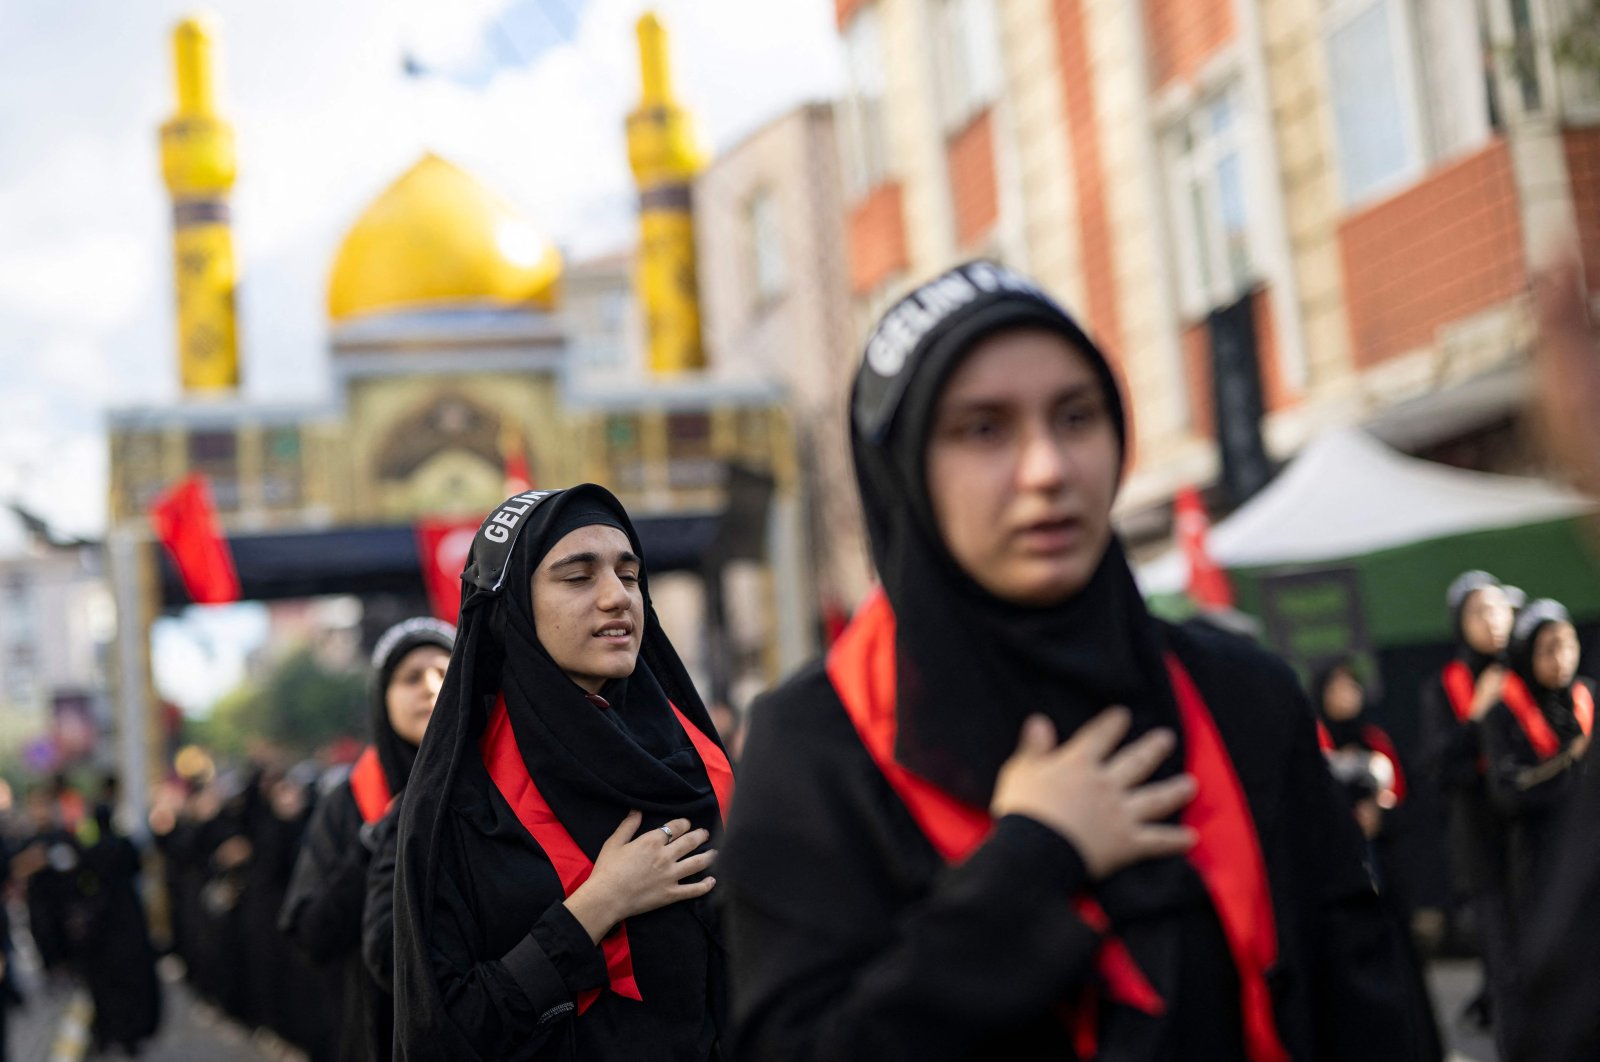 Shiite Muslims take part in the &quot;Ashura&quot; to commemorate the death of the grandson of the Prophet Muhammad who died during the Battle of Karbala in A.D. 680, Istanbul, Türkiye, July 27, 2023. (AFP Photo)